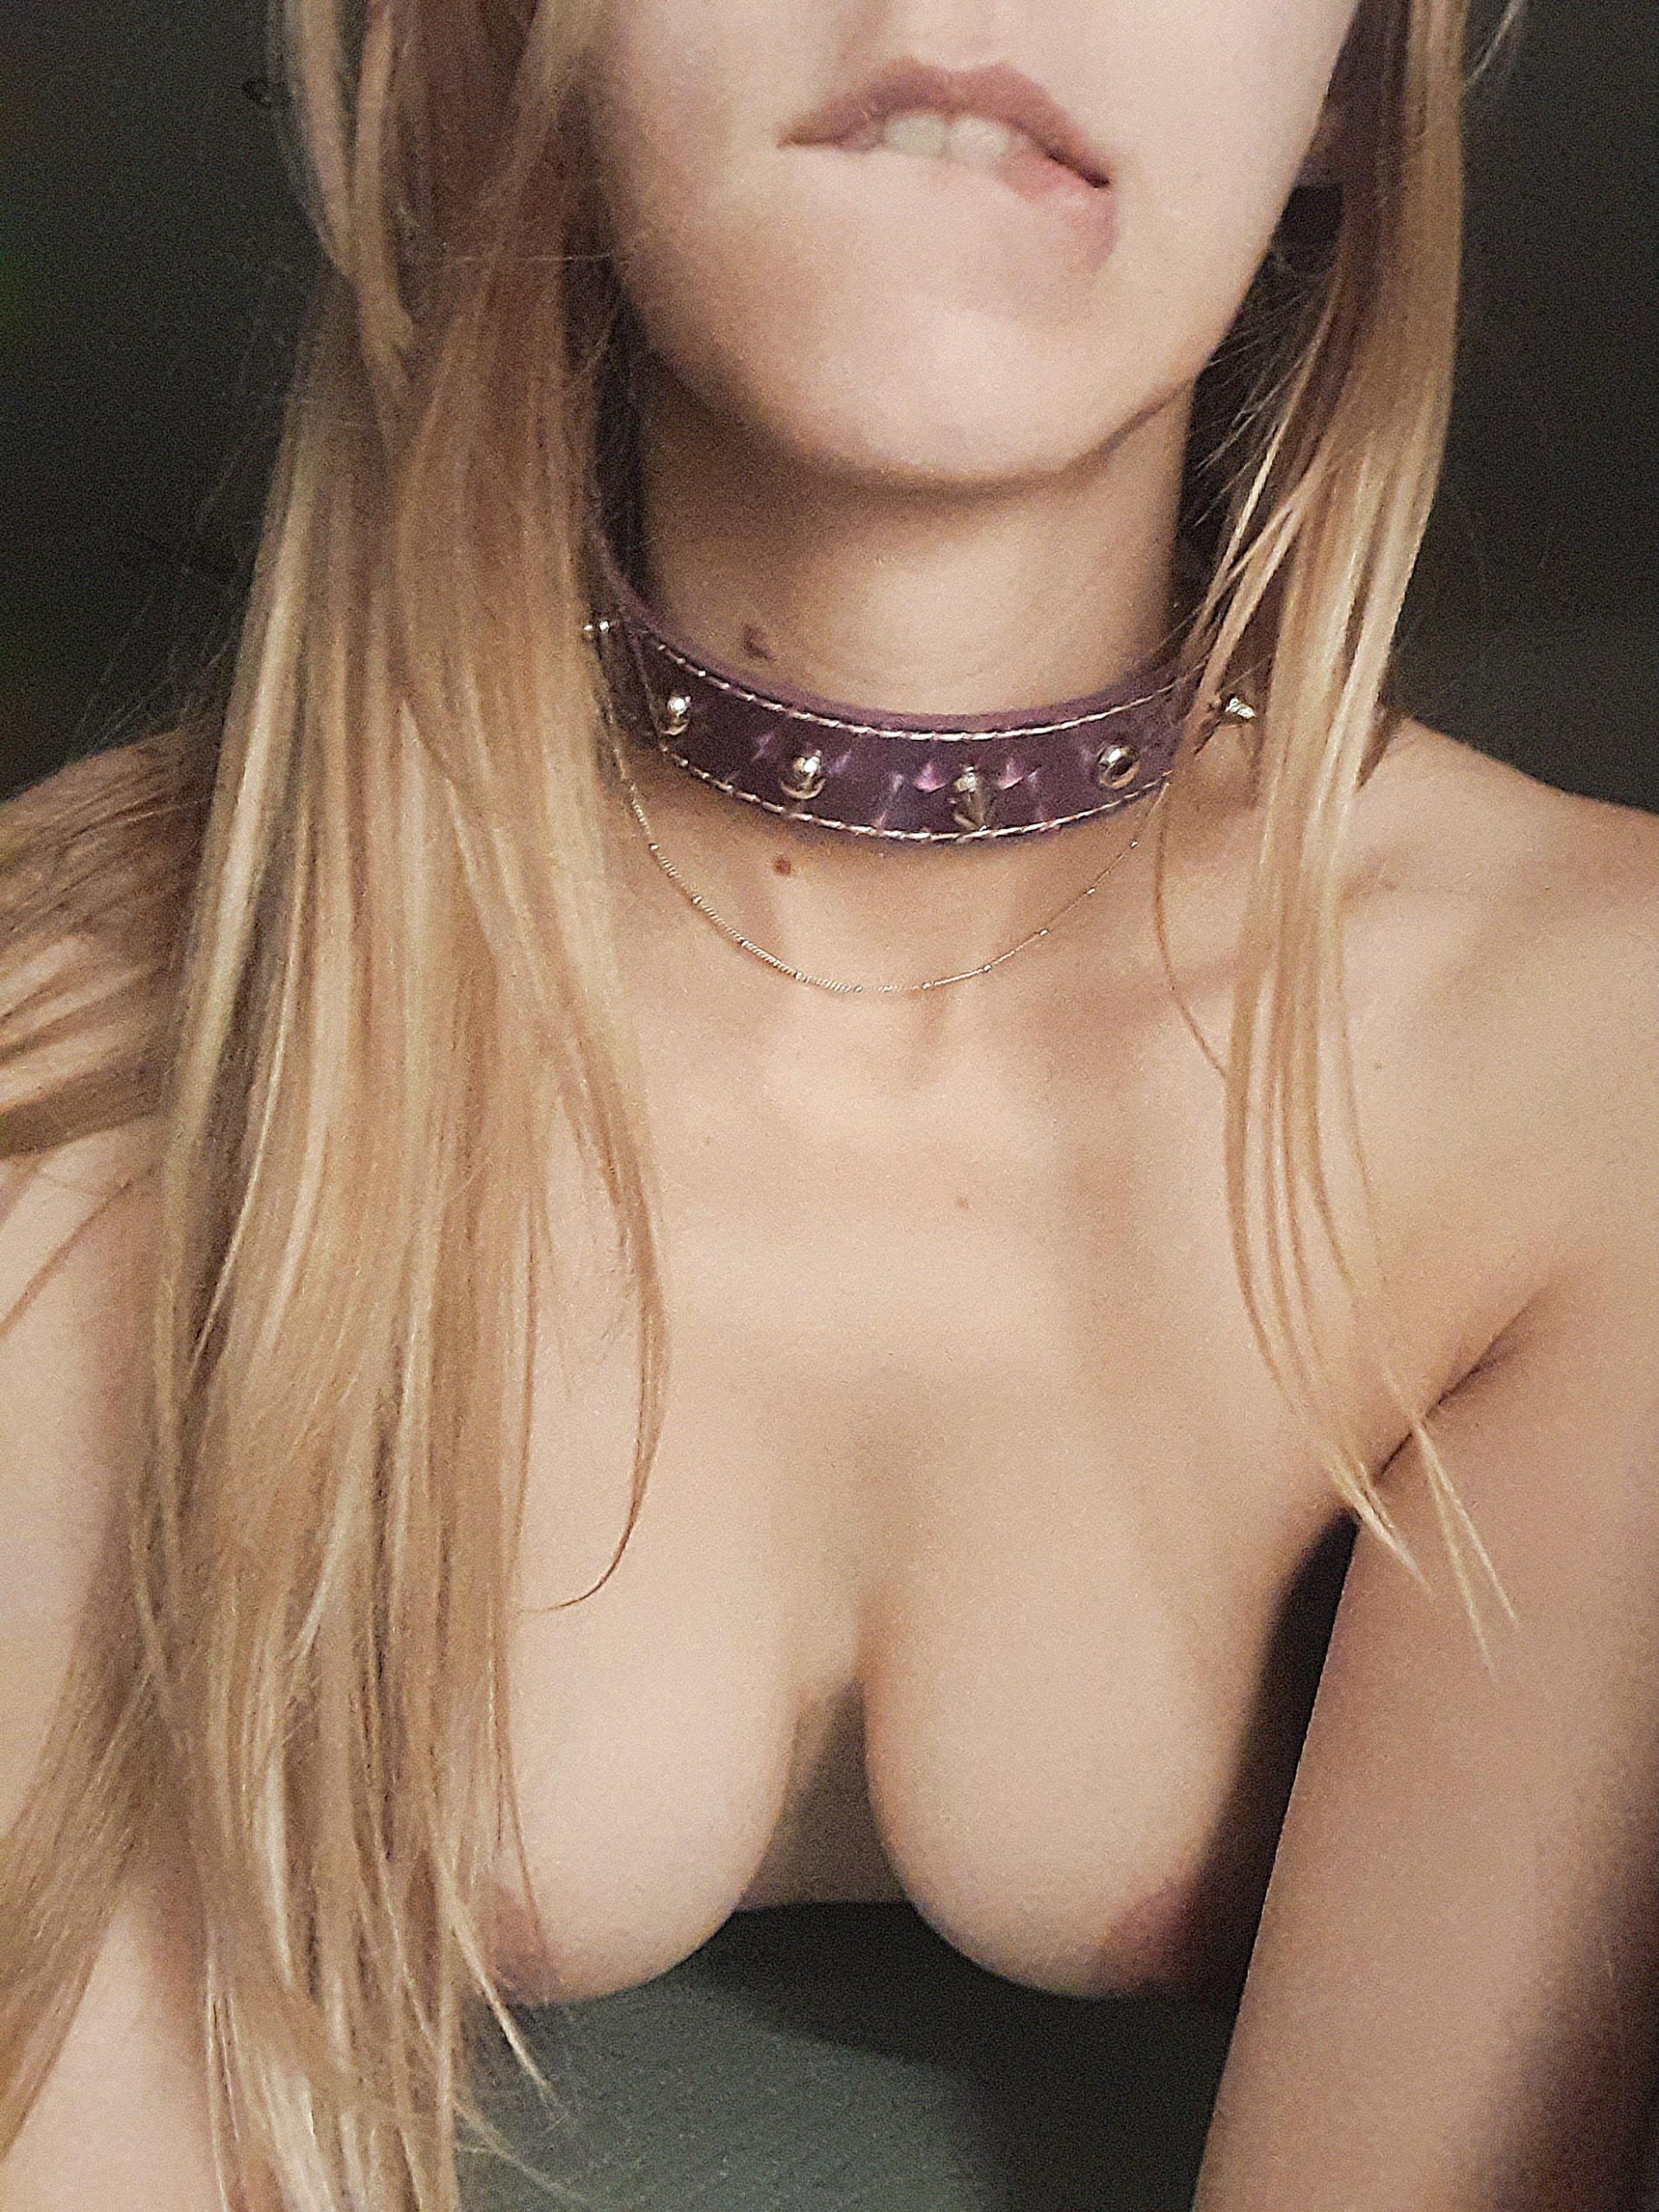 Collar was too small for my dog. I like it better on me anyway [f]